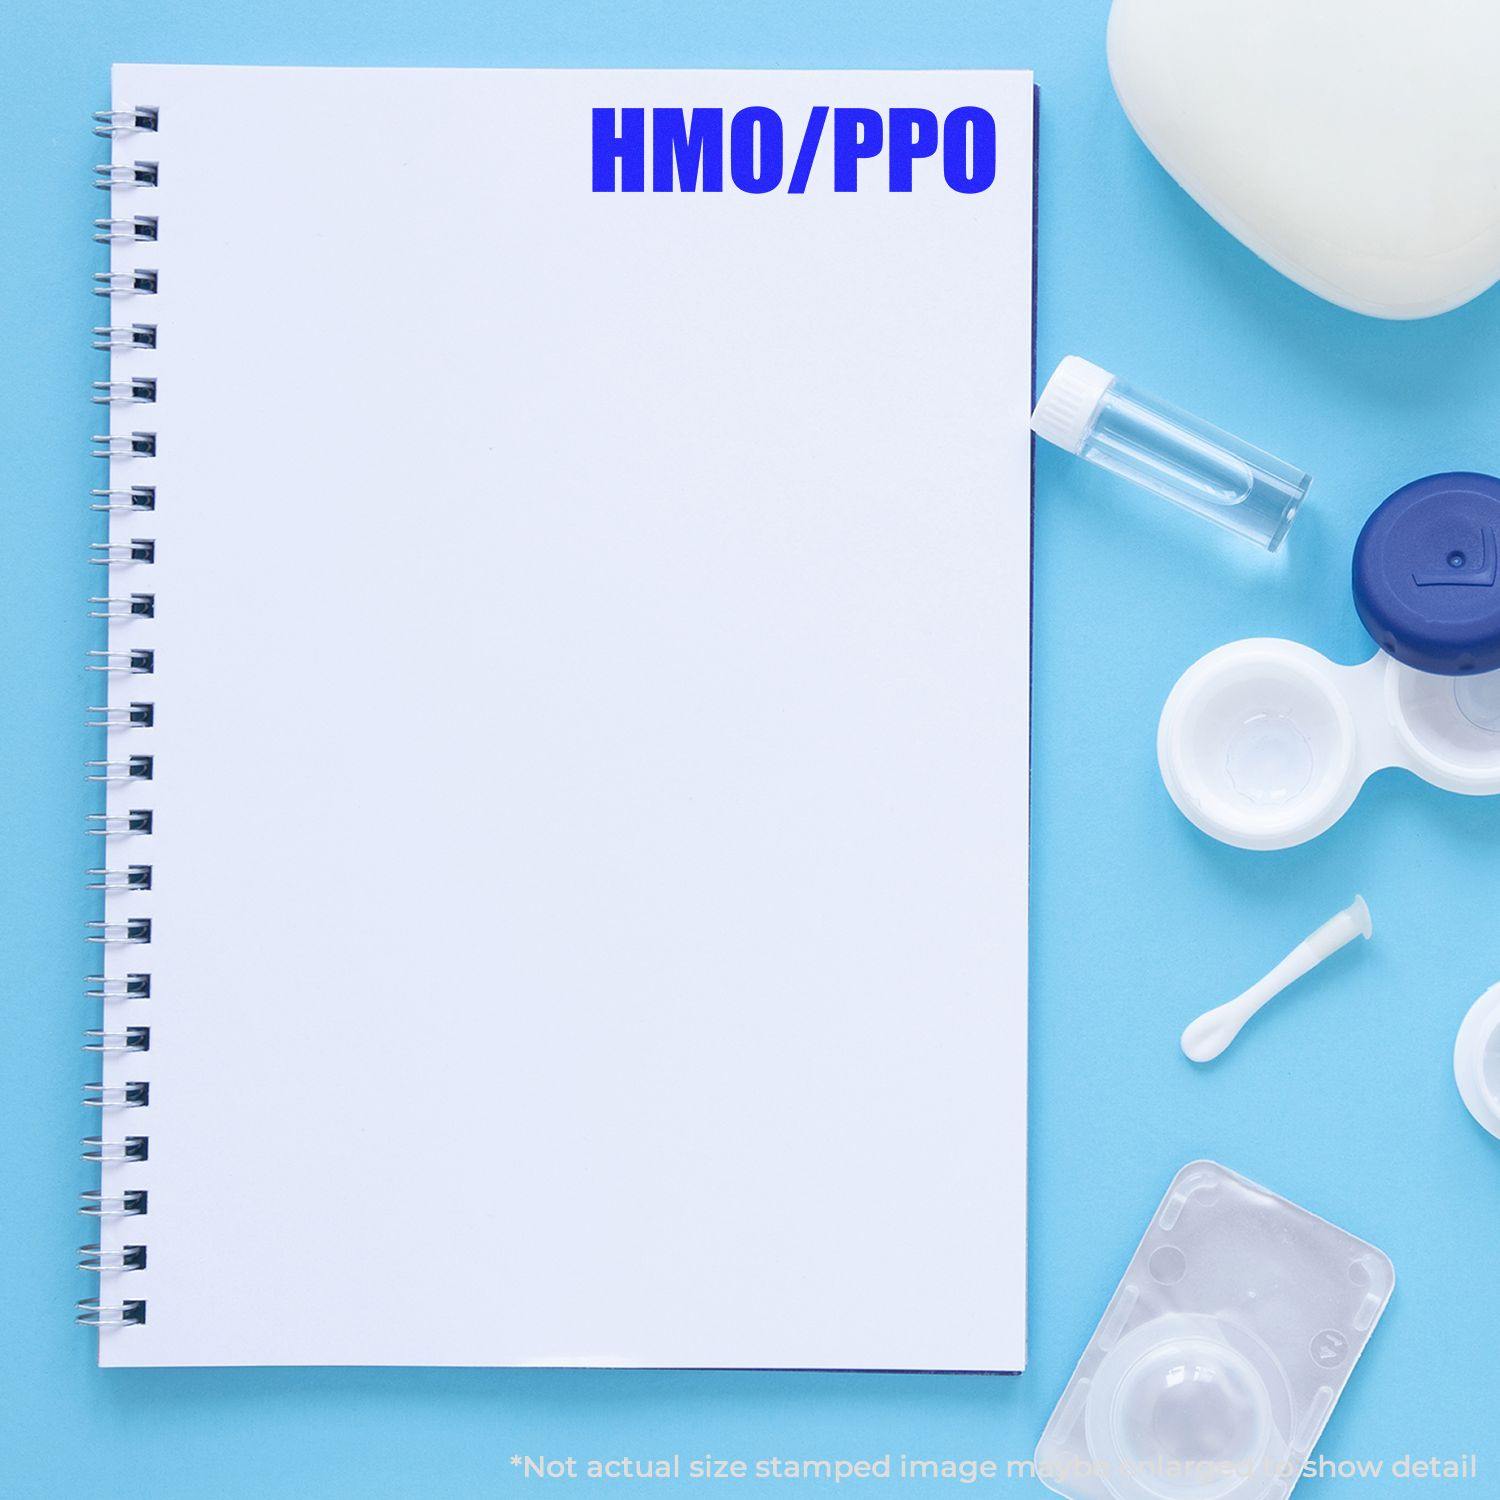 A stock office pre-inked stamp with a stamped image showing how the text "HMO/PPO" is displayed after stamping.